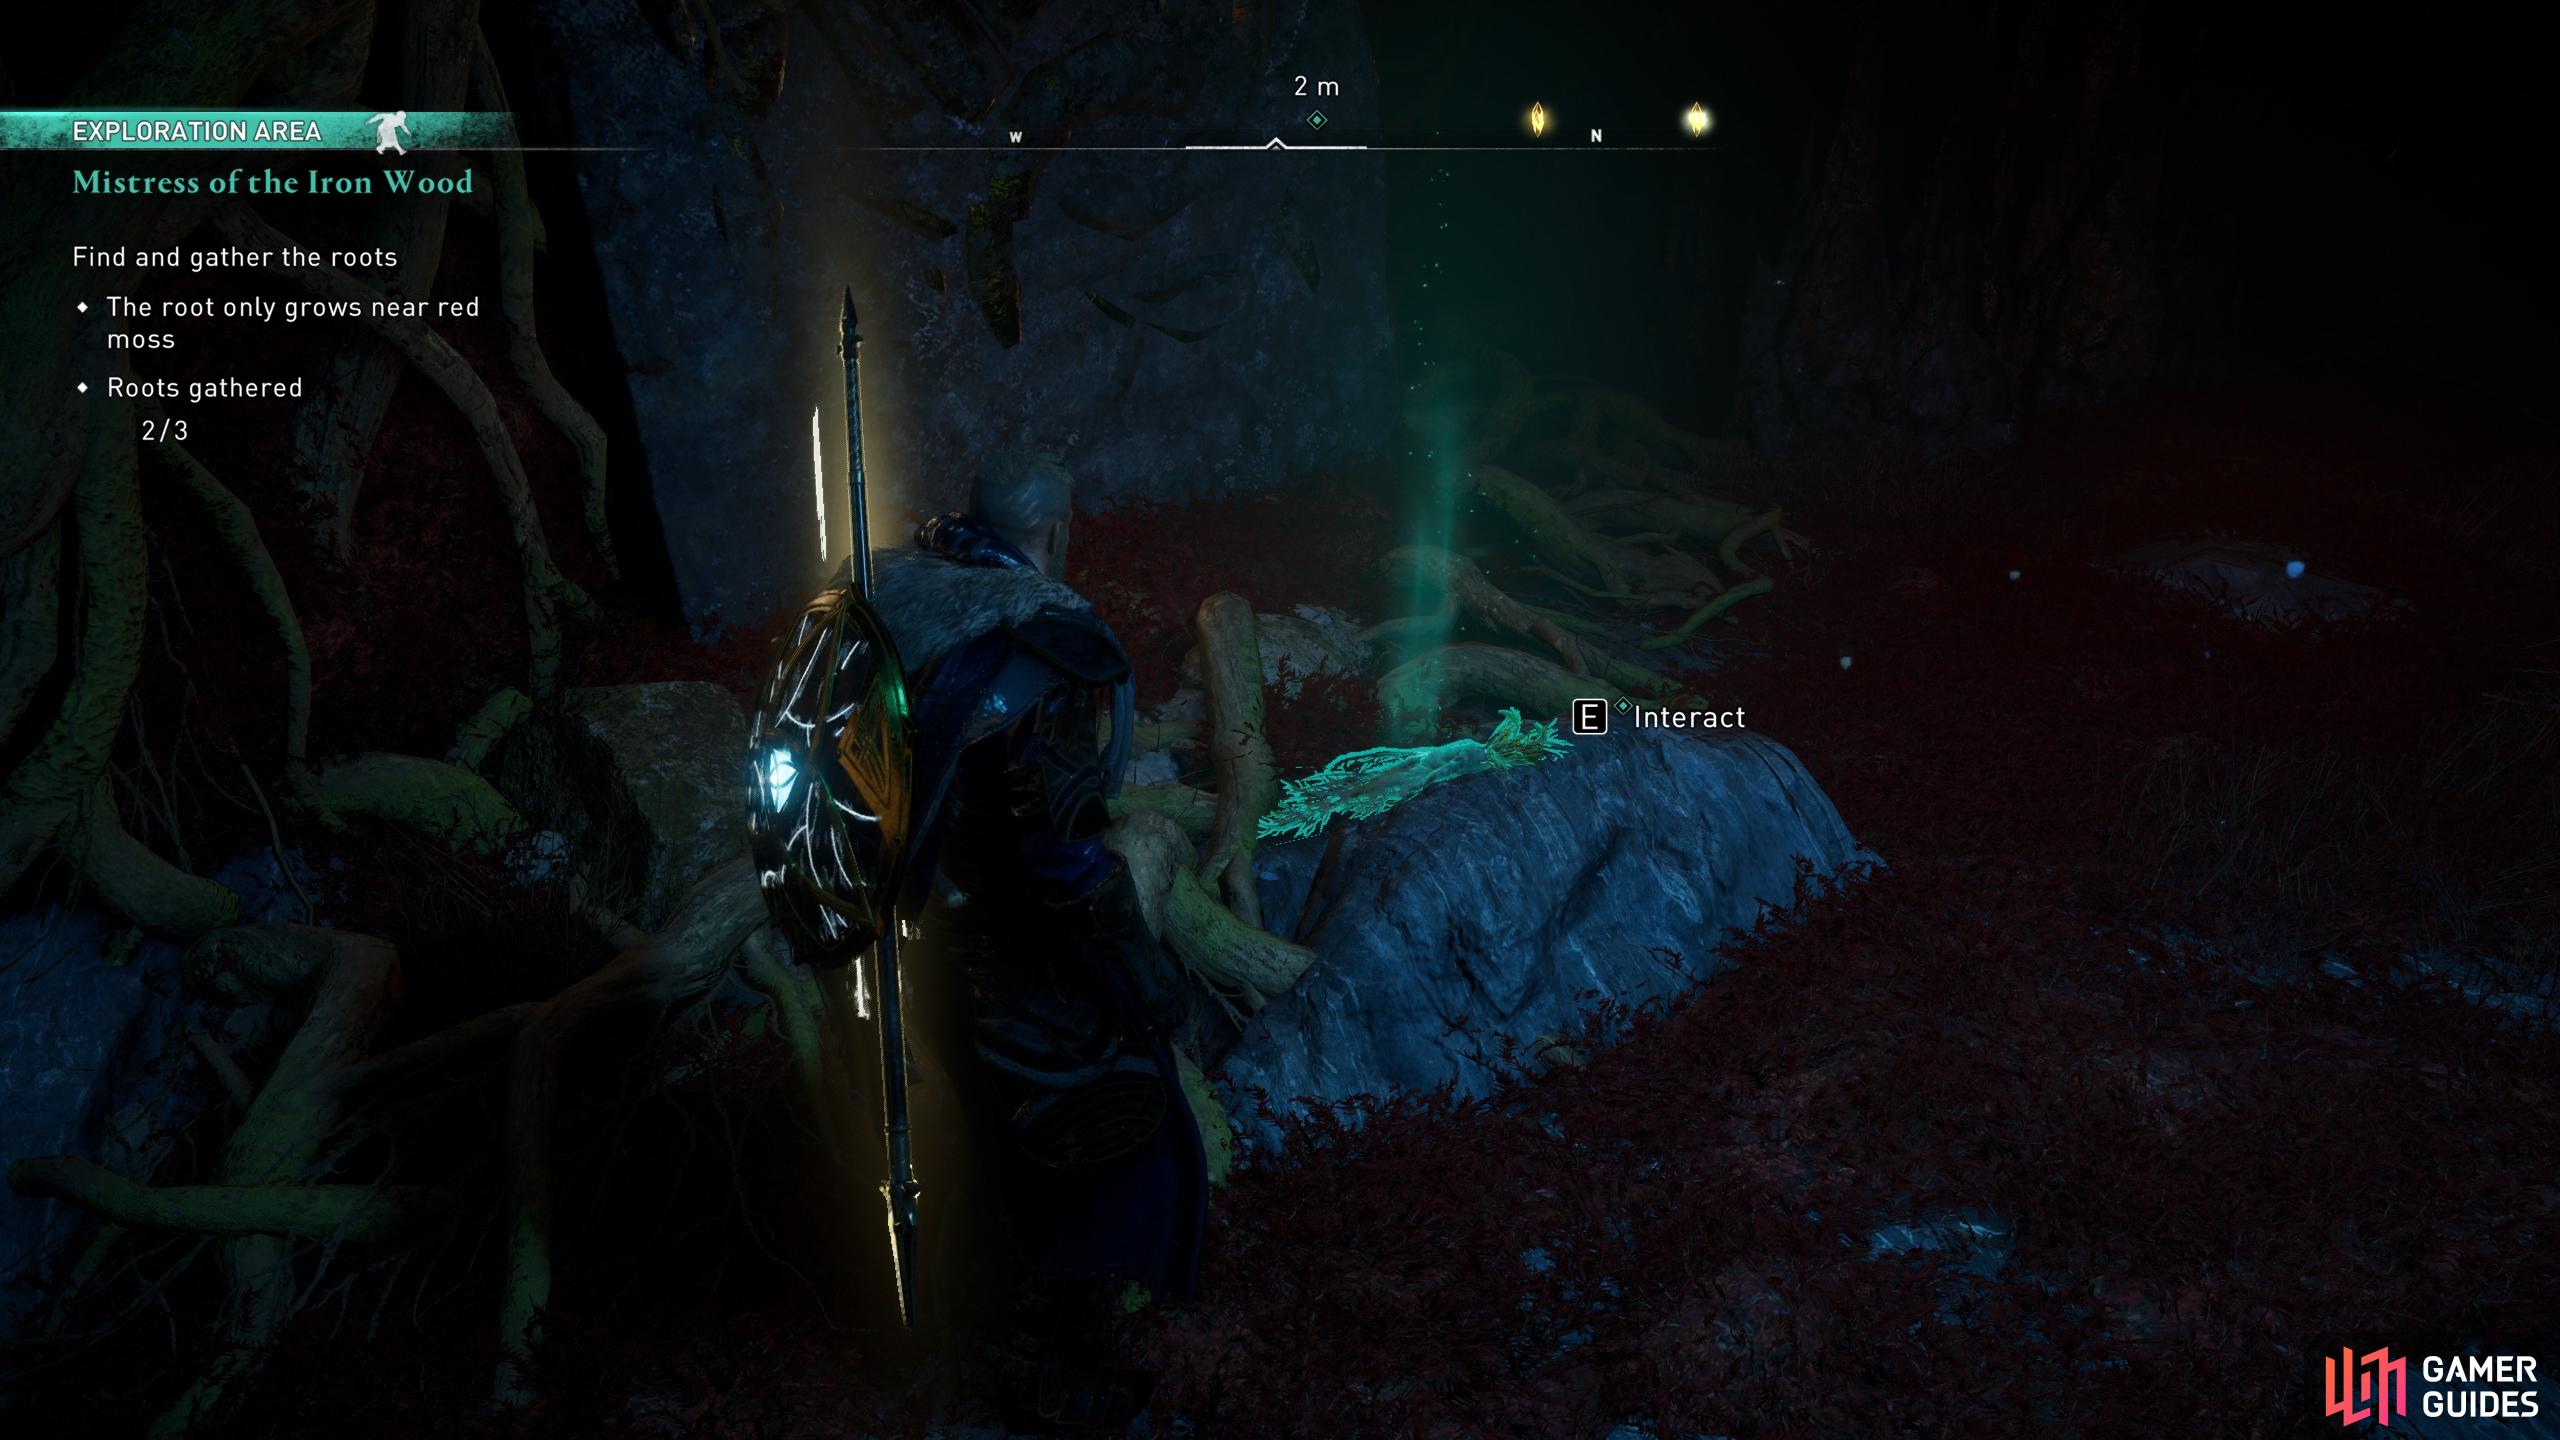 You can highlight the roots by using Odin's Sight within the cave.